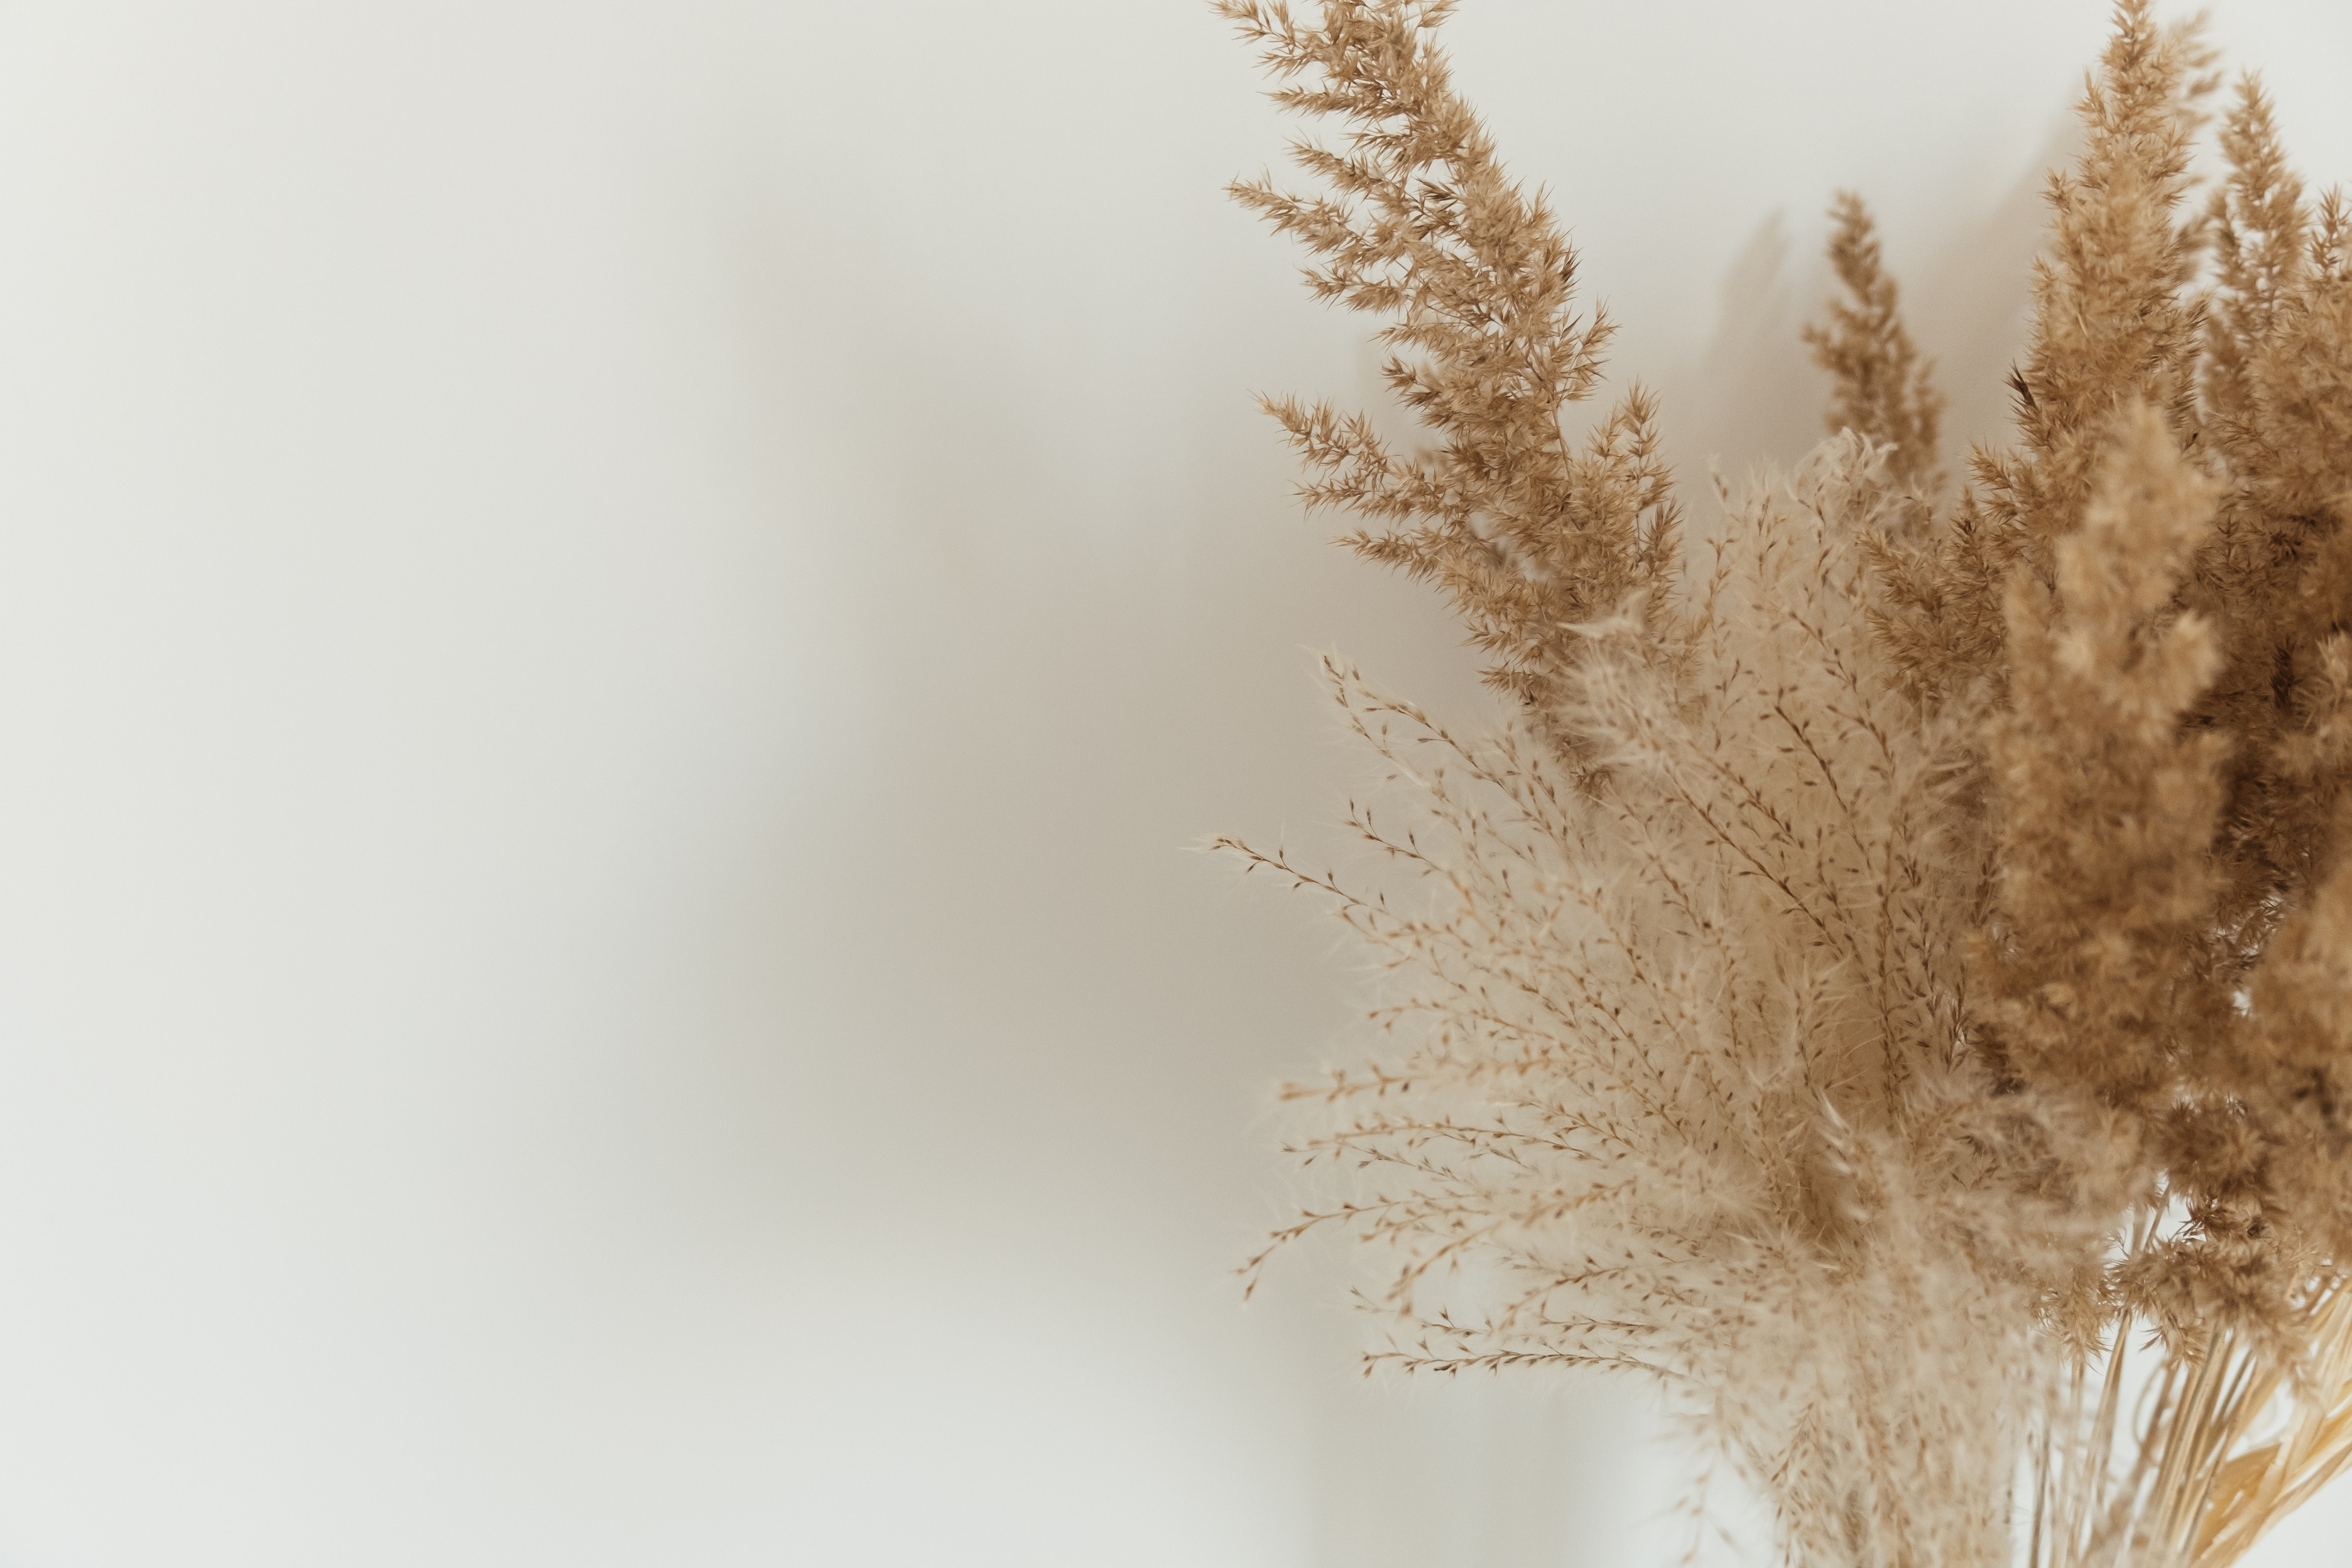 Dried Flowers against the White Wall